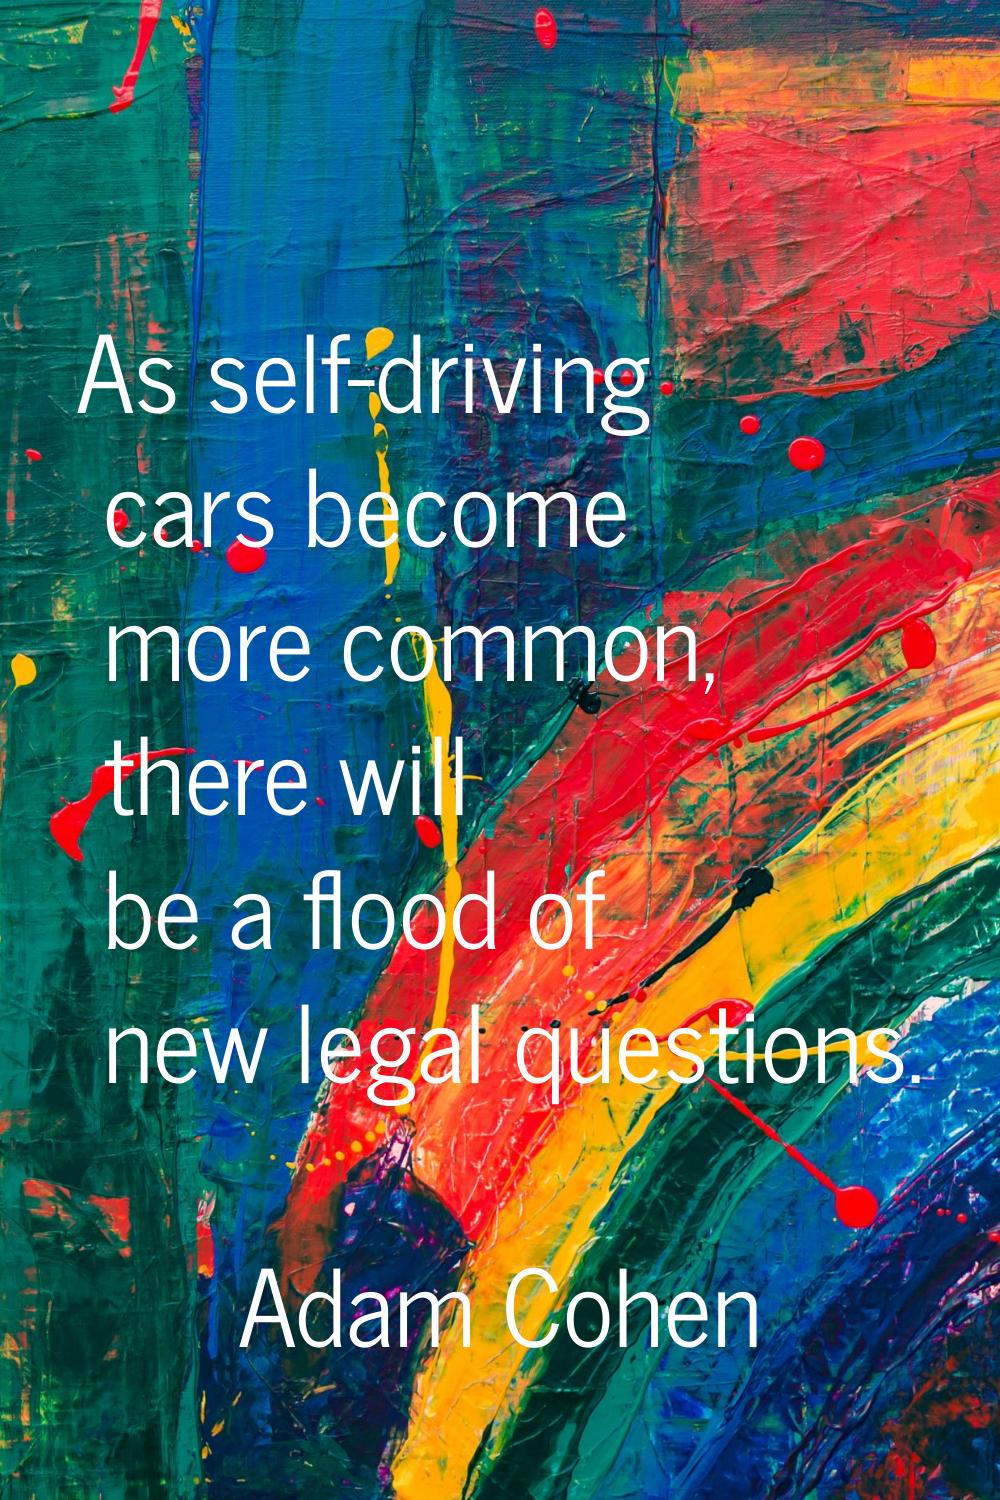 As self-driving cars become more common, there will be a flood of new legal questions.